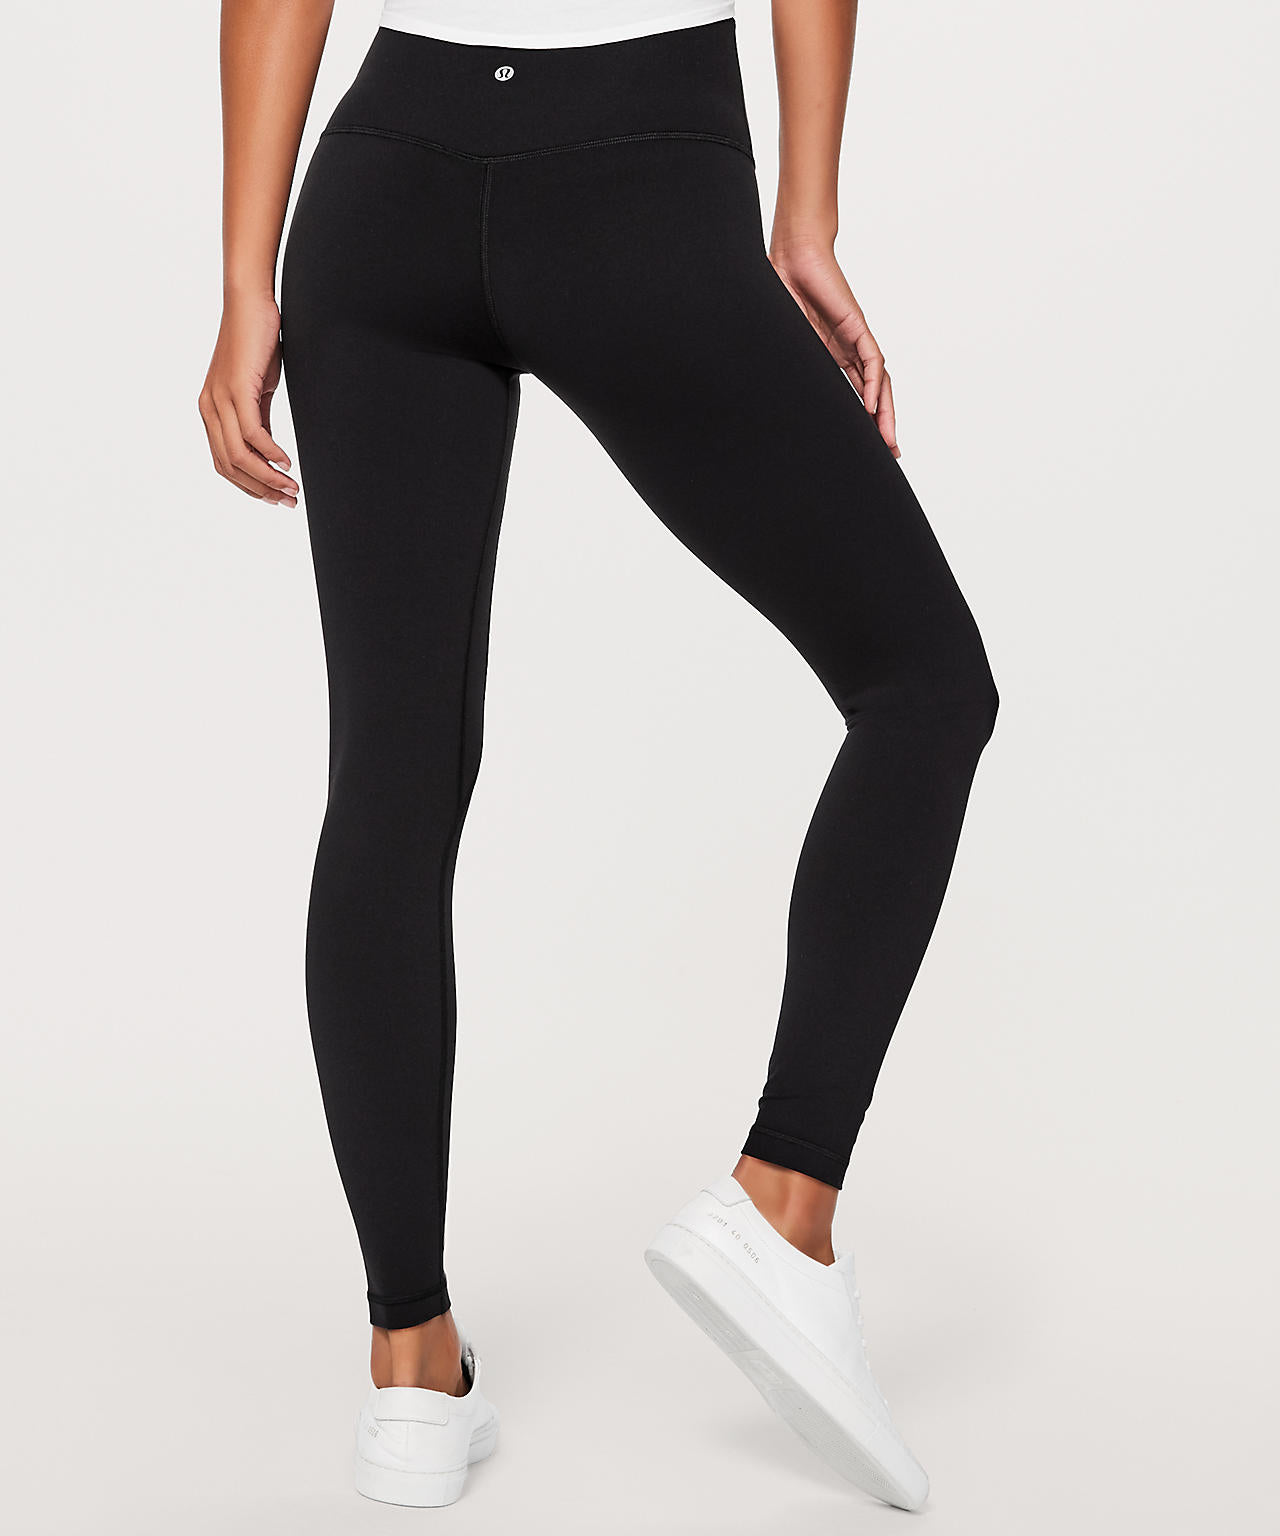 Lululemon Align Stretchy Full Length Yoga Pants - Women's Workout Leggings,  High-Waisted Design, Breathable, Sculpted Fit, 28 Inch Inseam, Black, 8 :  Buy Online at Best Price in KSA - Souq is